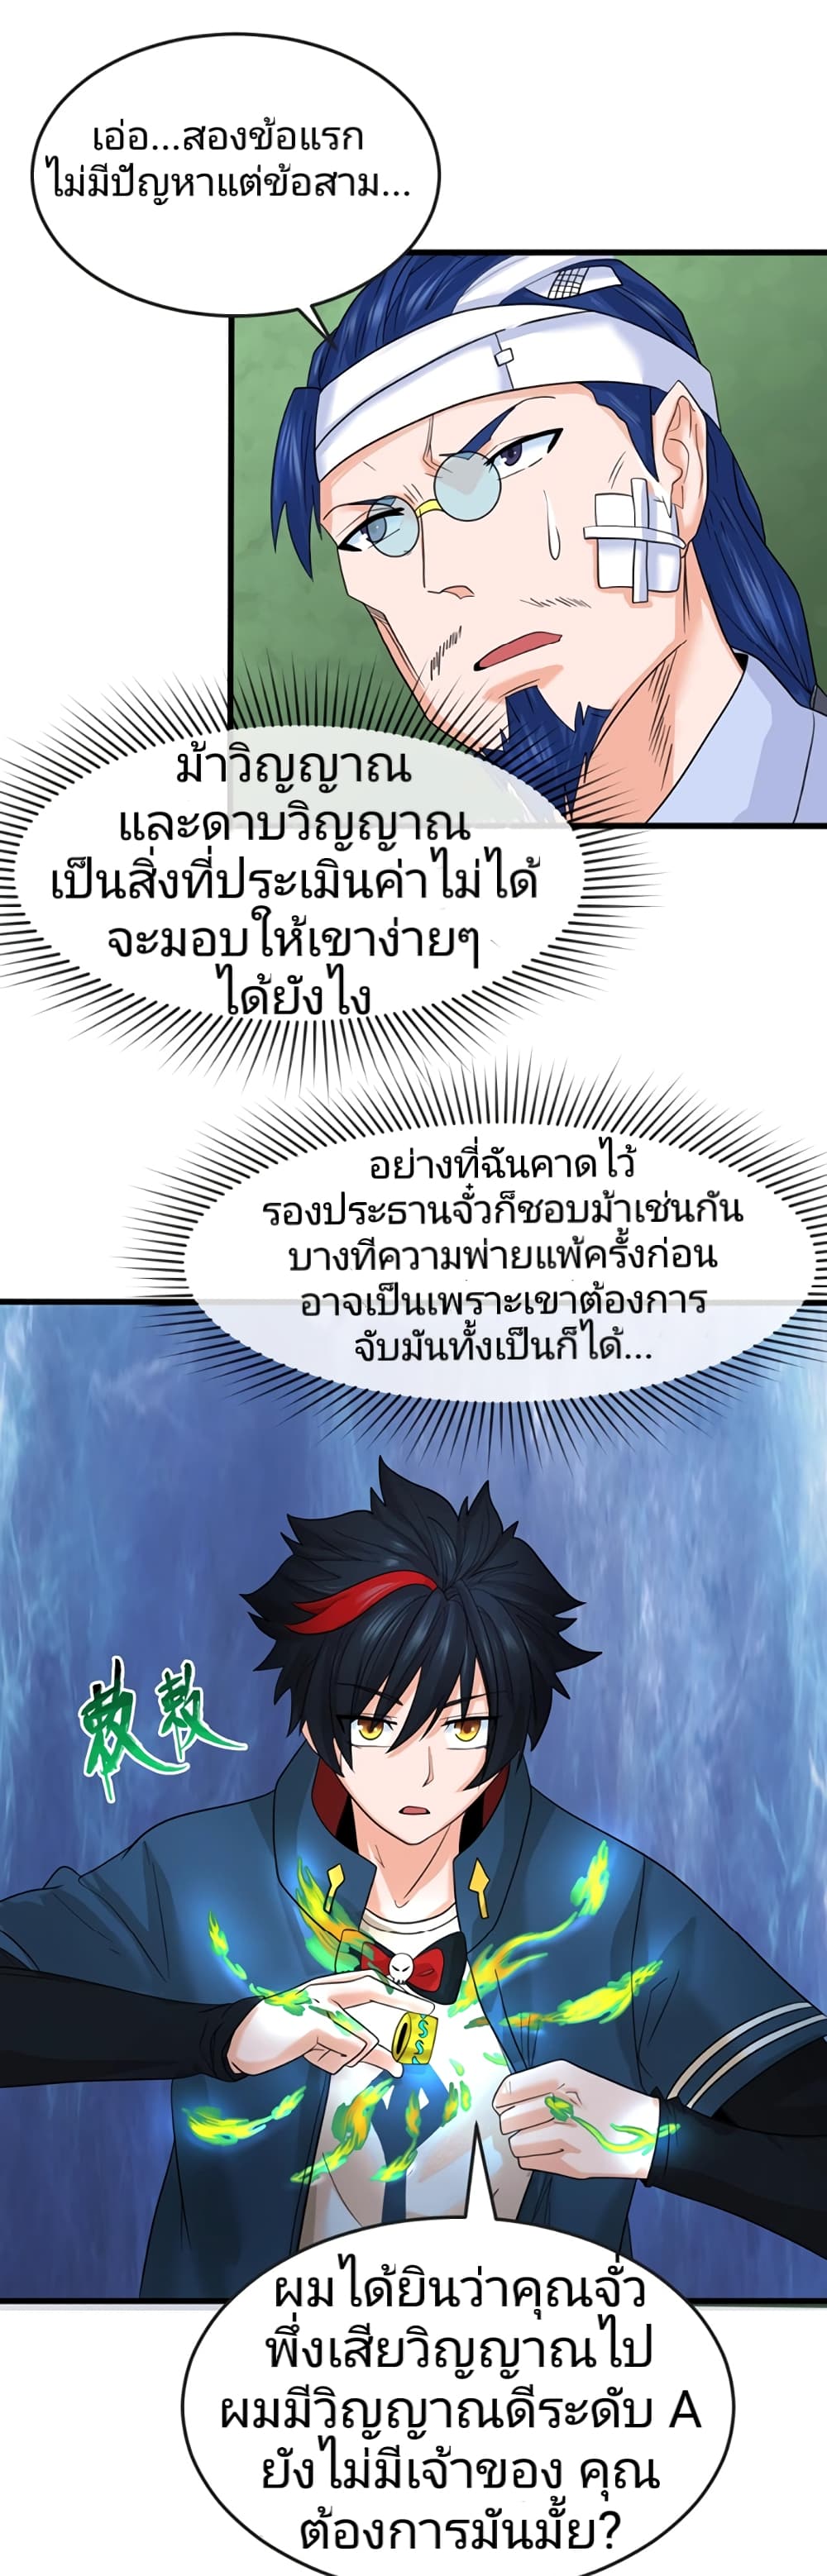 The Age of Ghost Spirits à¸à¸­à¸à¸à¸µà¹ 23 (23)